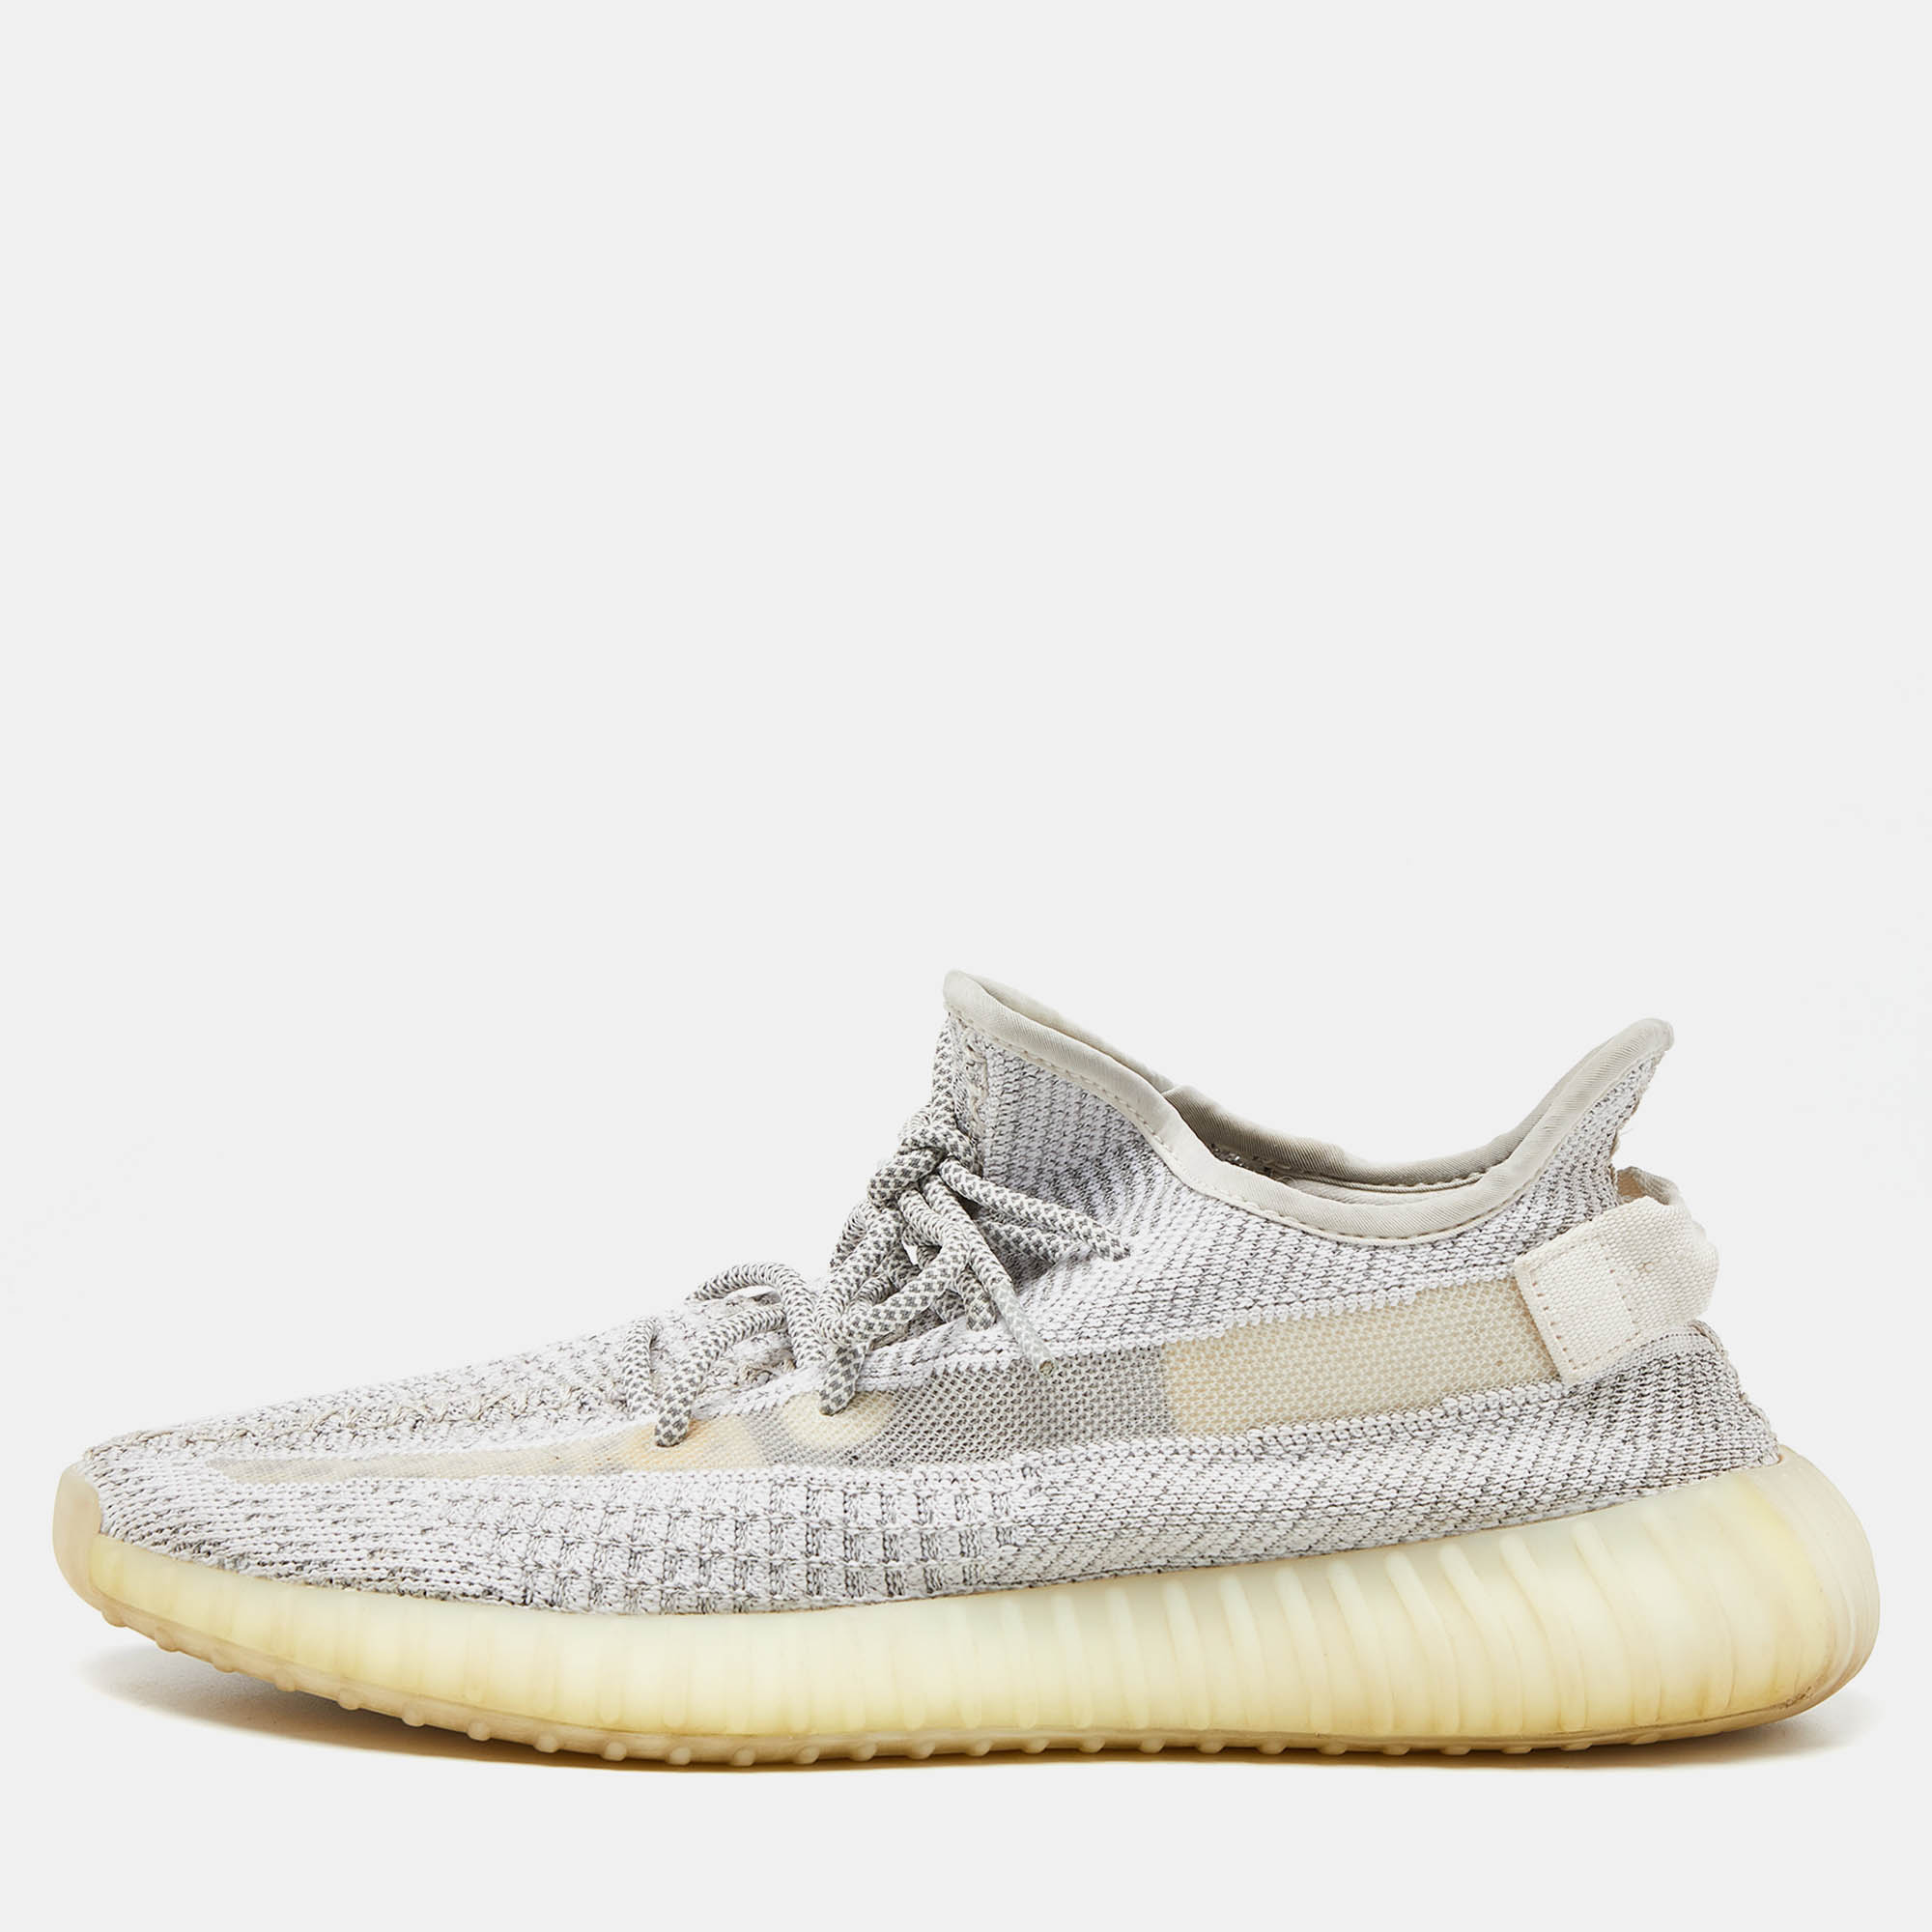 

Yeezy x Adidas White/Grey Knit Fabric Boost 350 V2 Static Reflective Sneakers Size